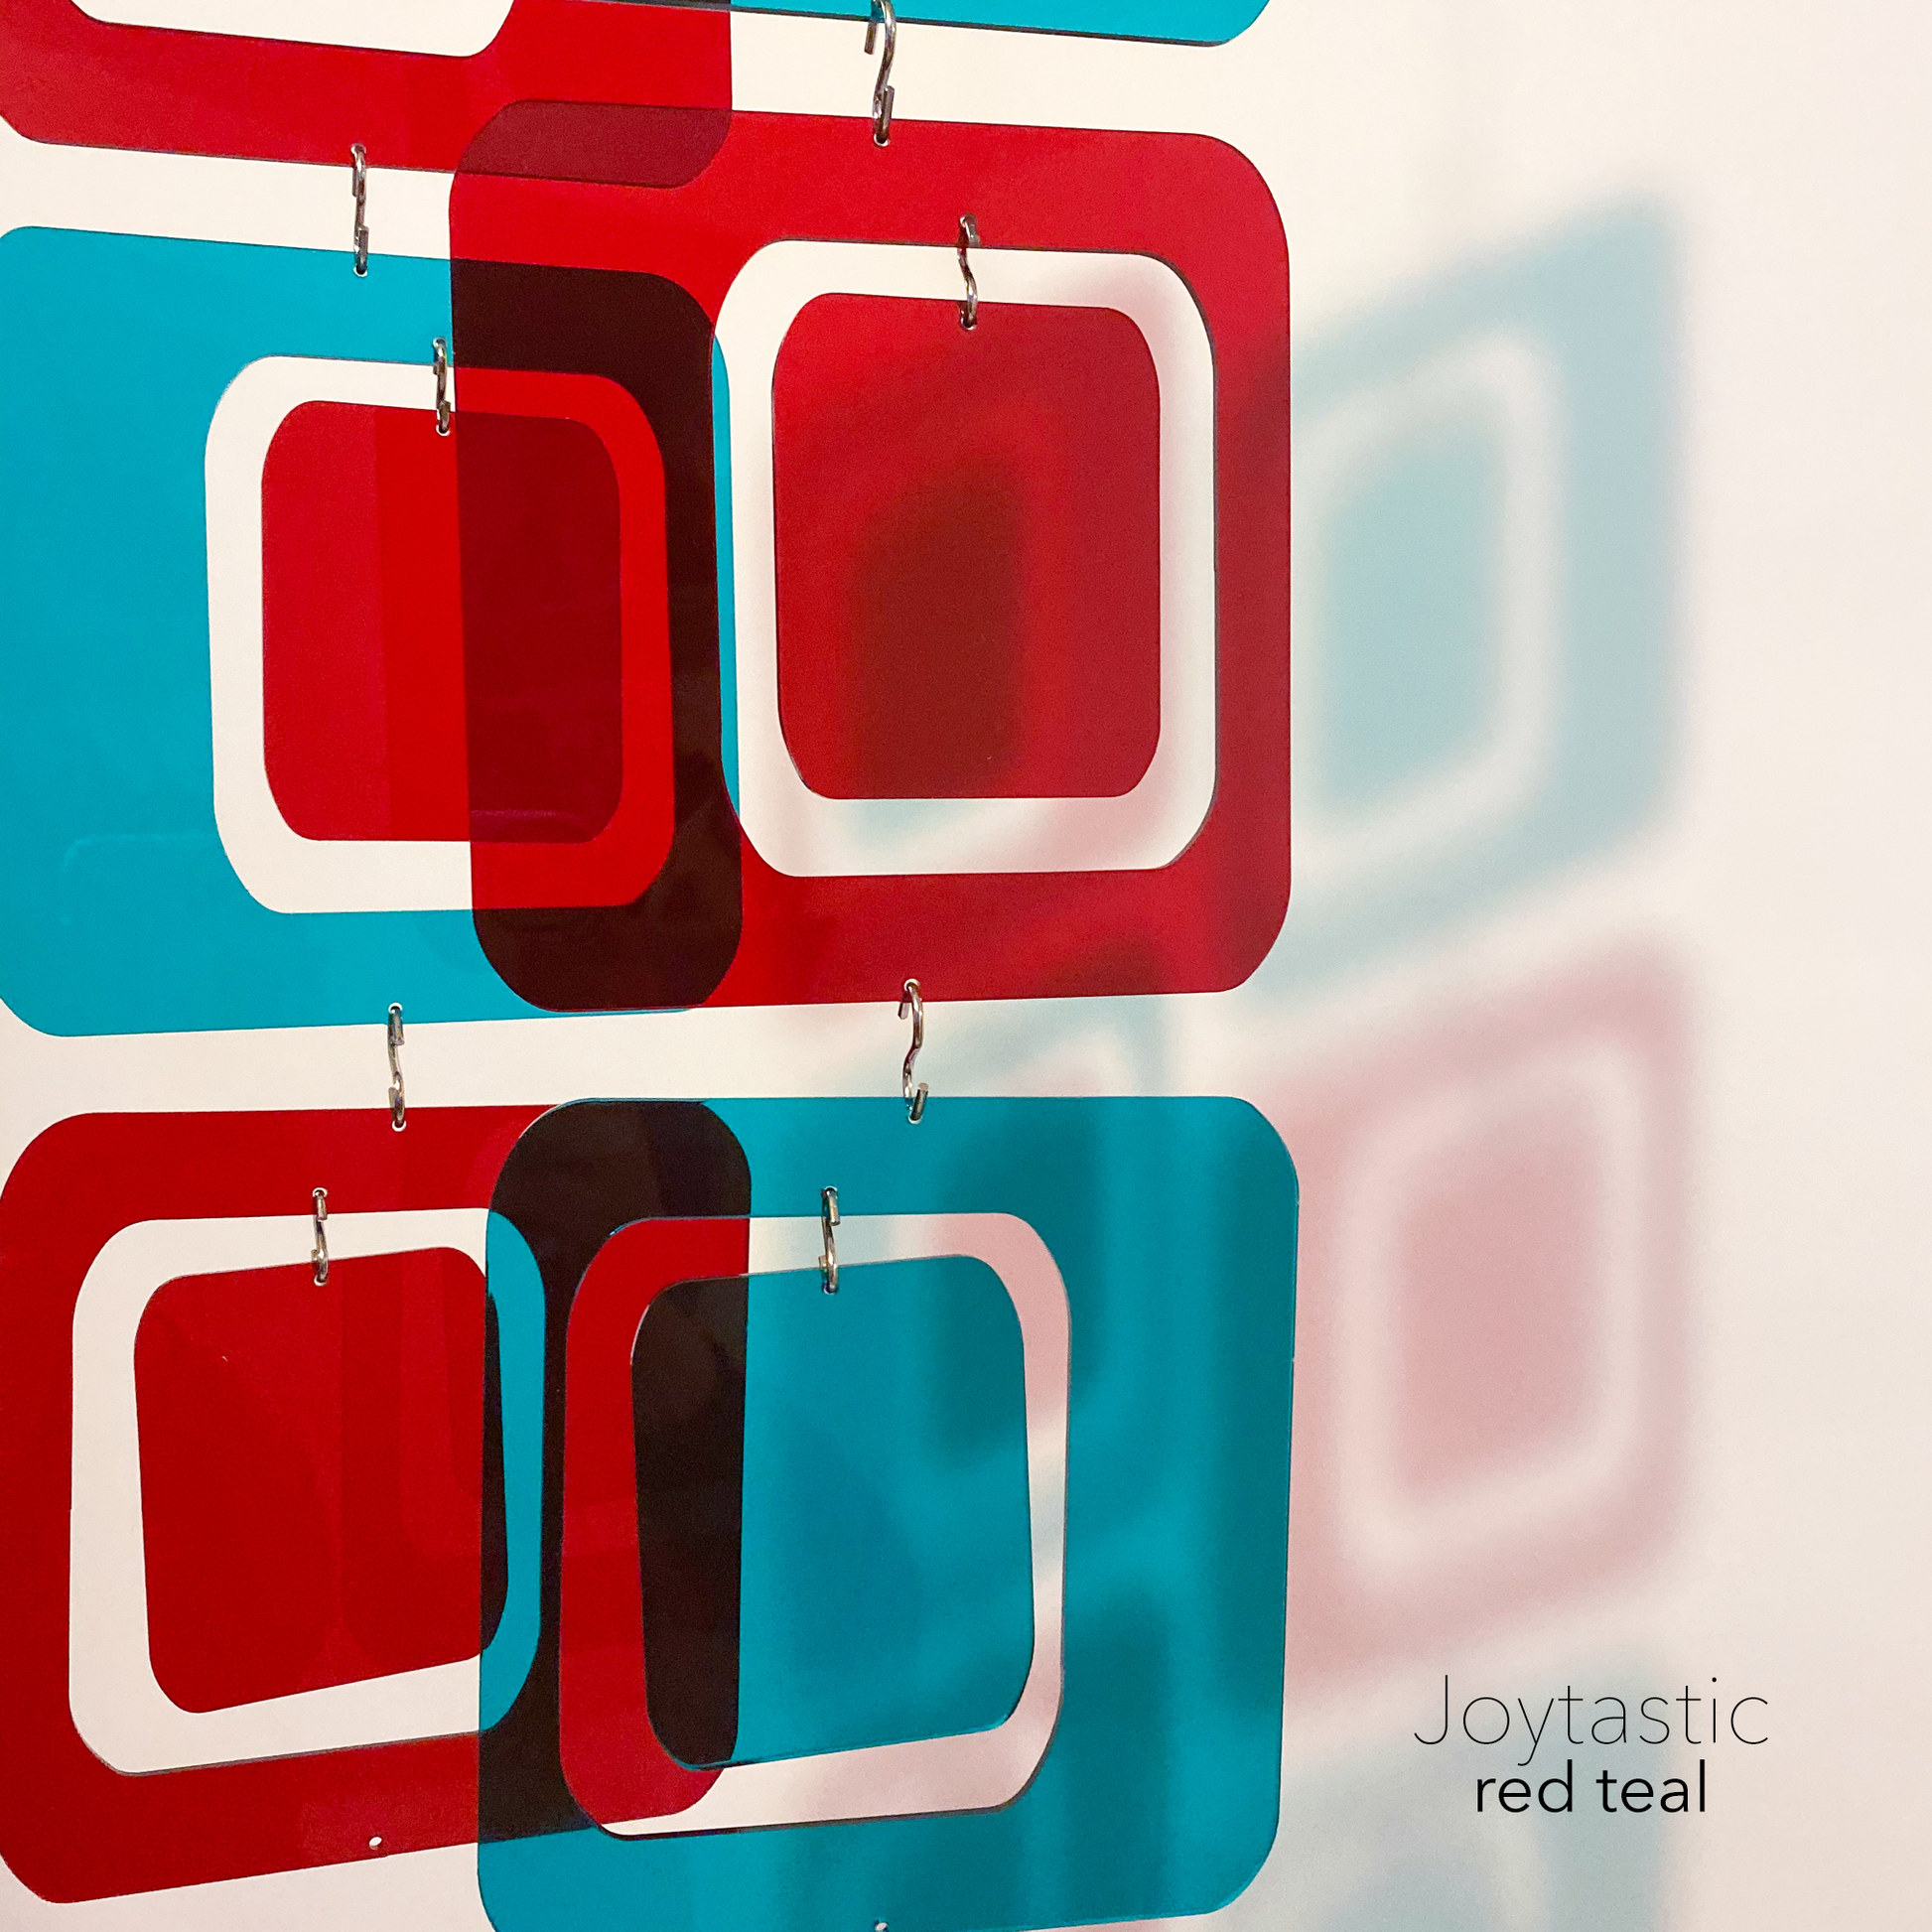 Red and Teal Coolsville Reflective Room Divider, Curtain, Partition, Wall Art, Mobile by AtomicMobiles.com